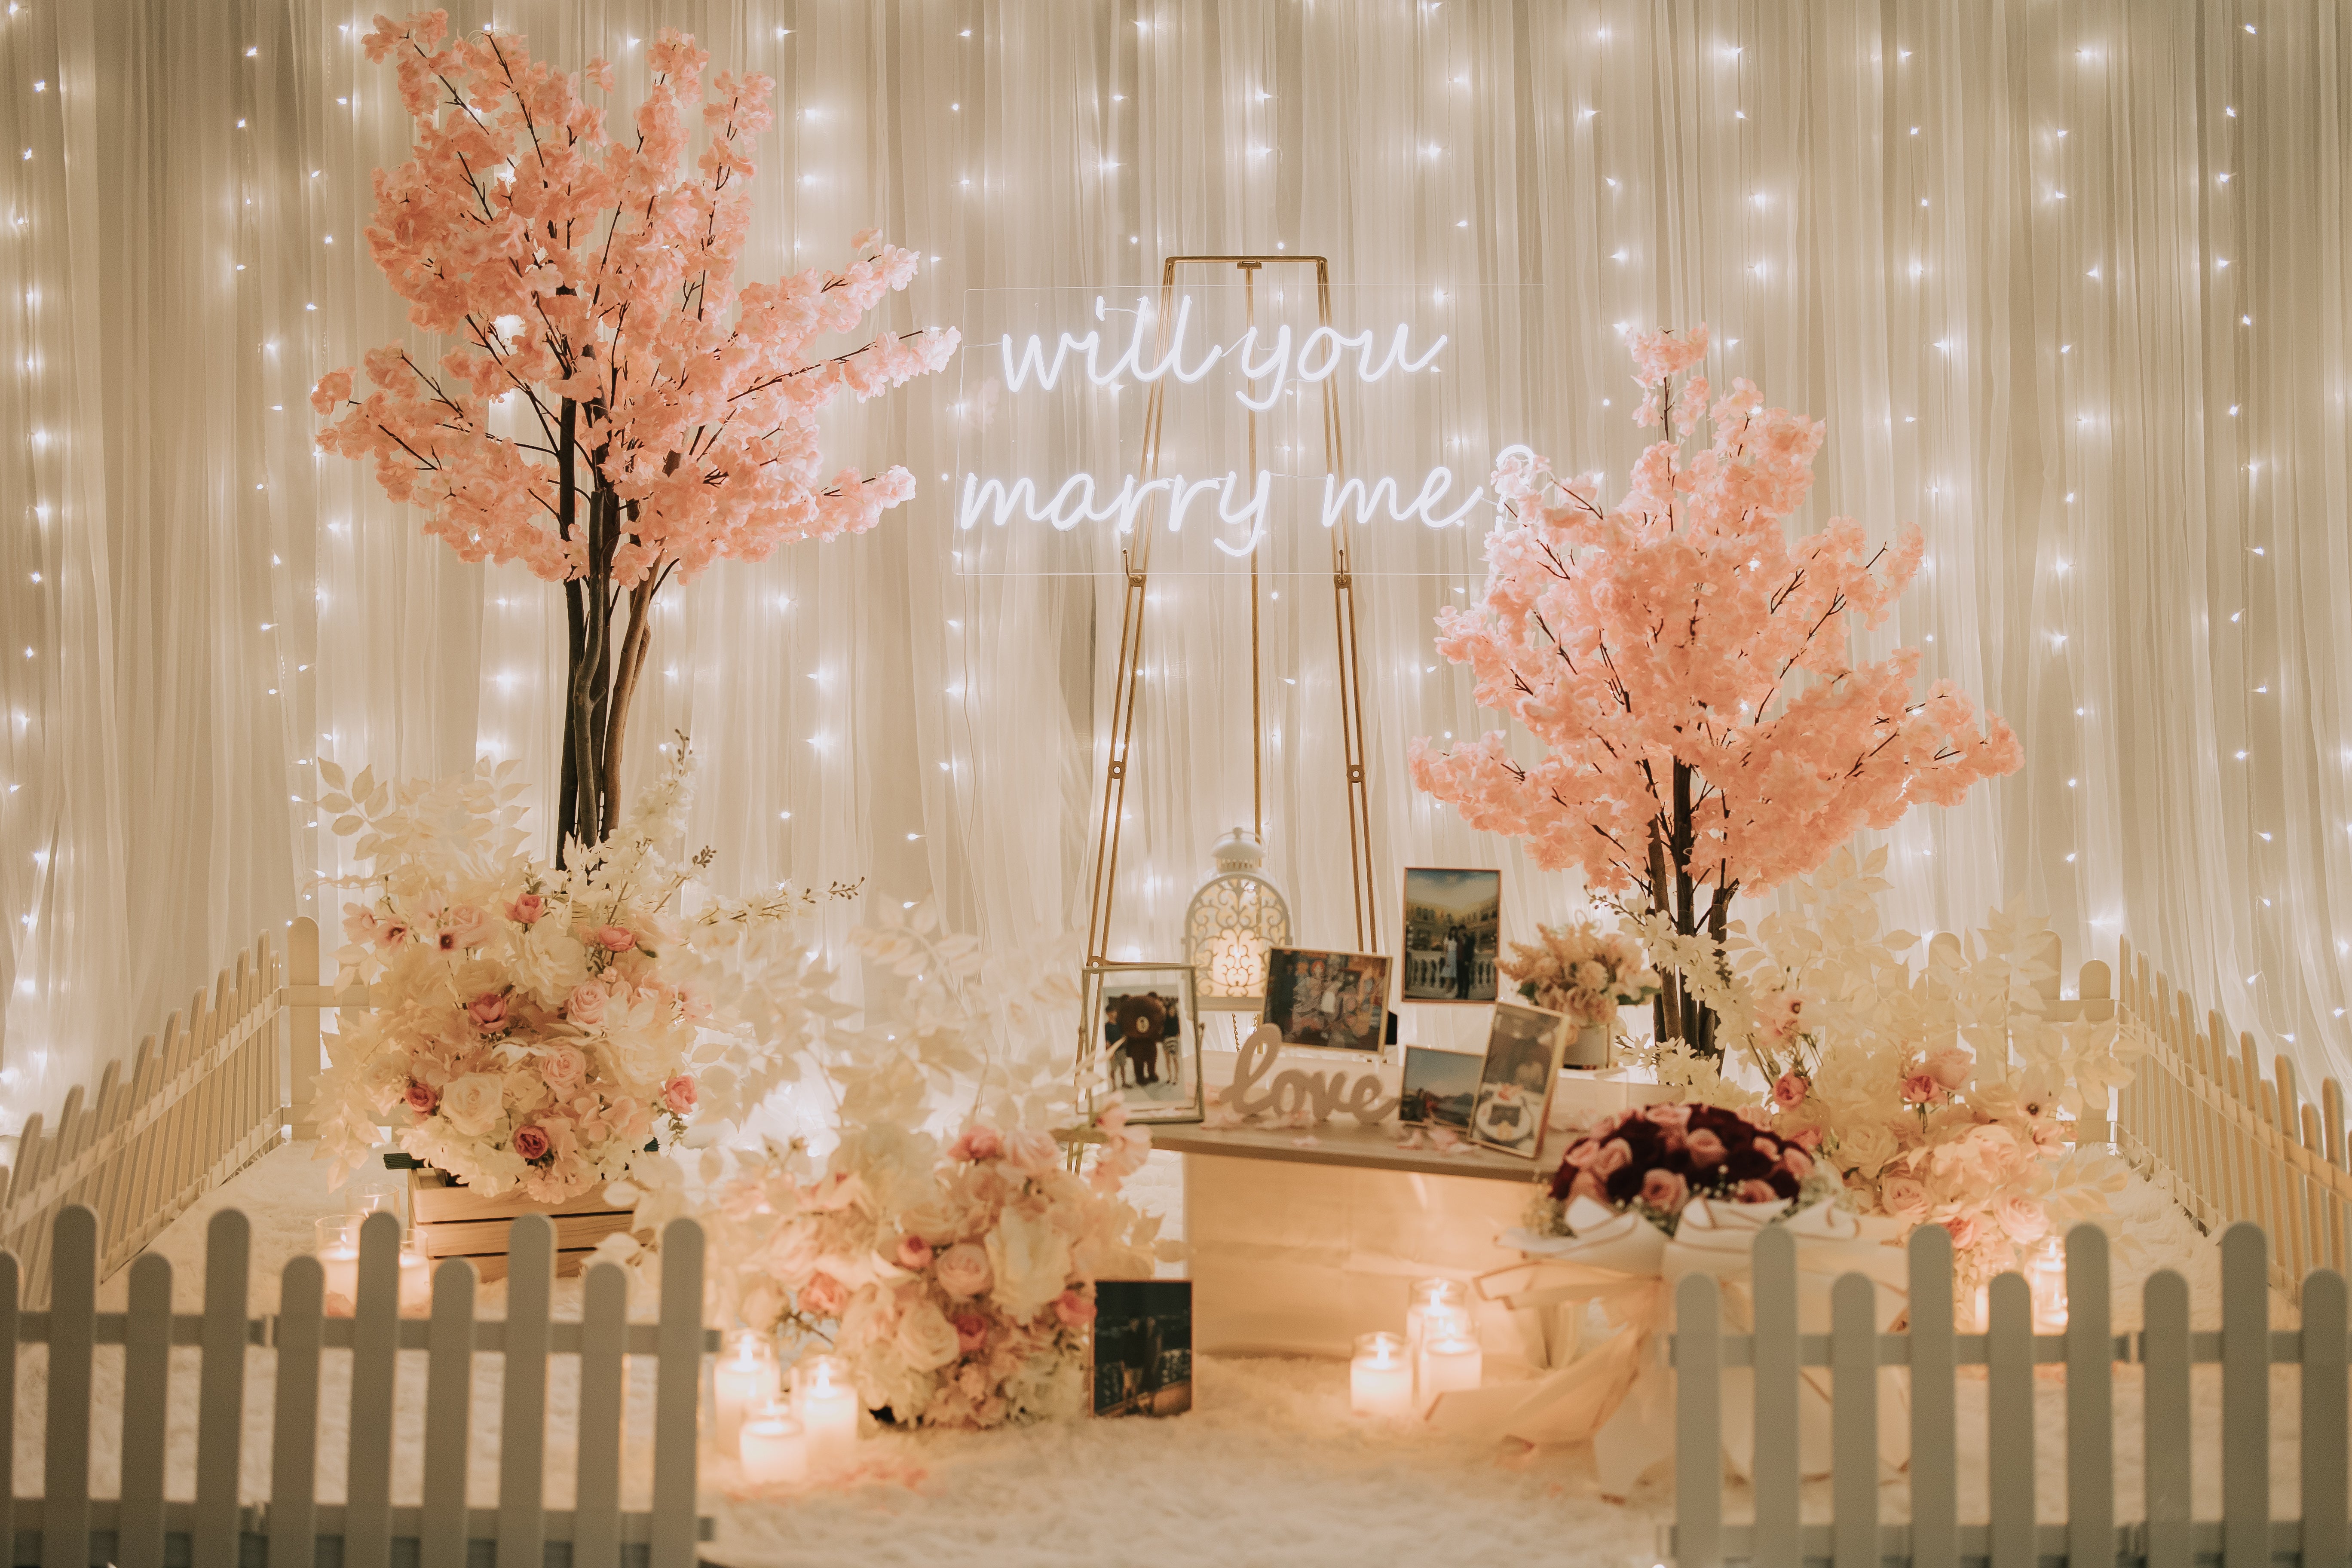 Romantic Proposal Decor in Singapore with Fairylight Backdrop, Cherry Blossoms, Flowers and Neon Sign at Haus of Feel's Indoor Studio by Style It Simply